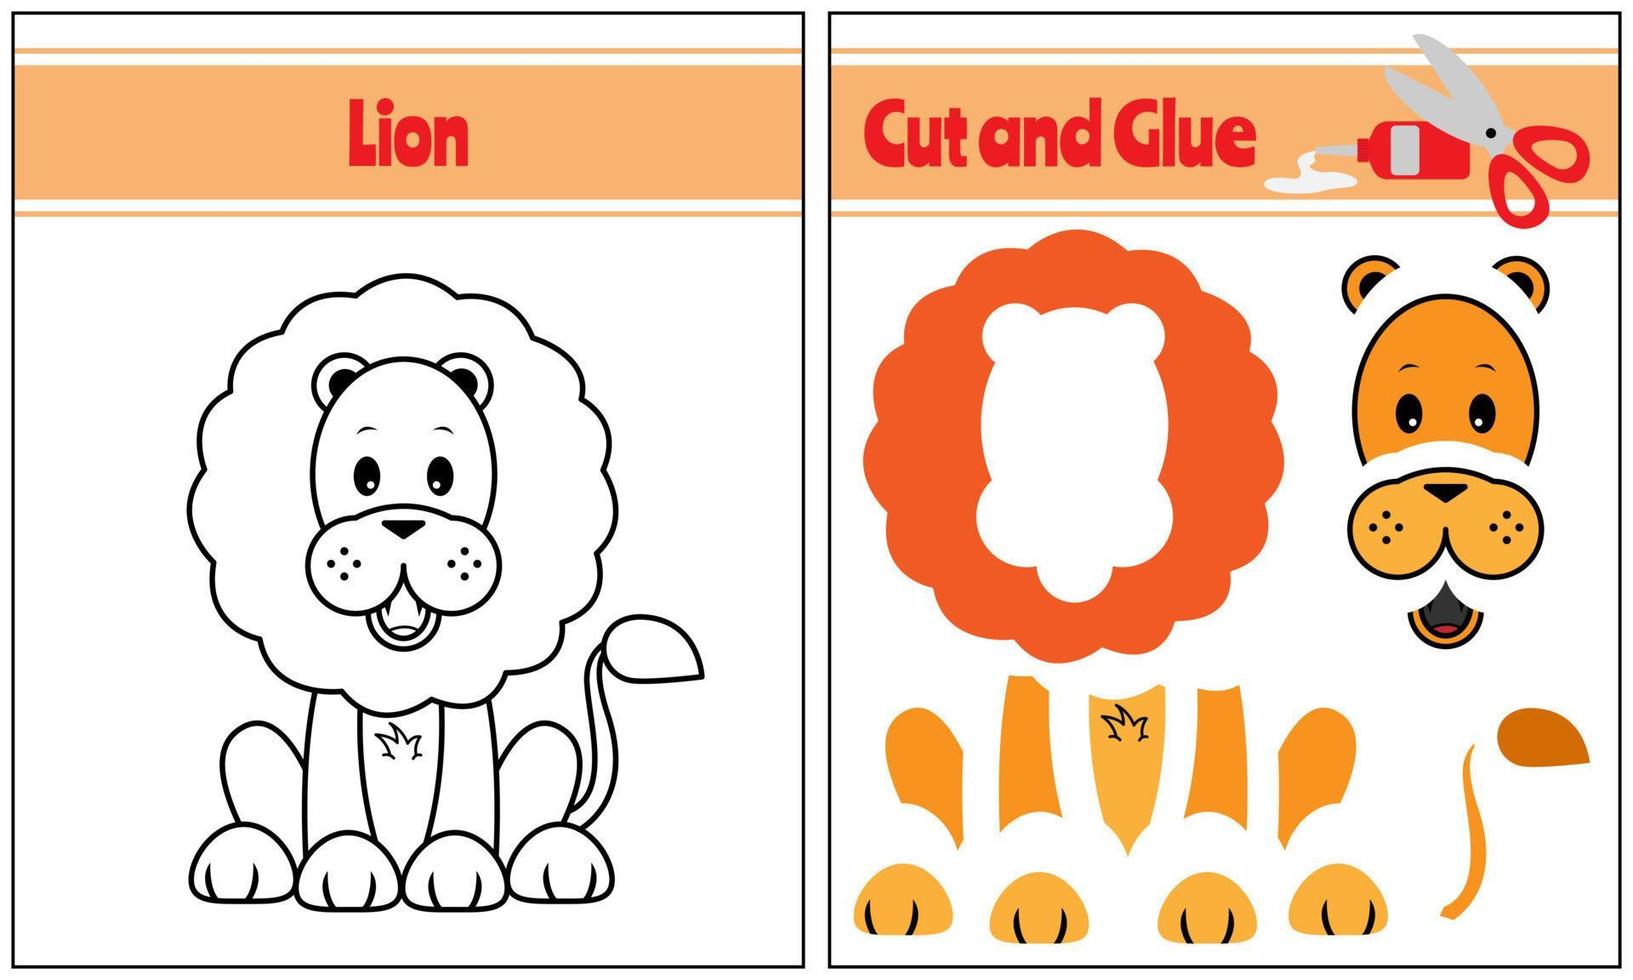 Cut And Glue Page Of Cute Lion. Suitable For Kids Activities vector